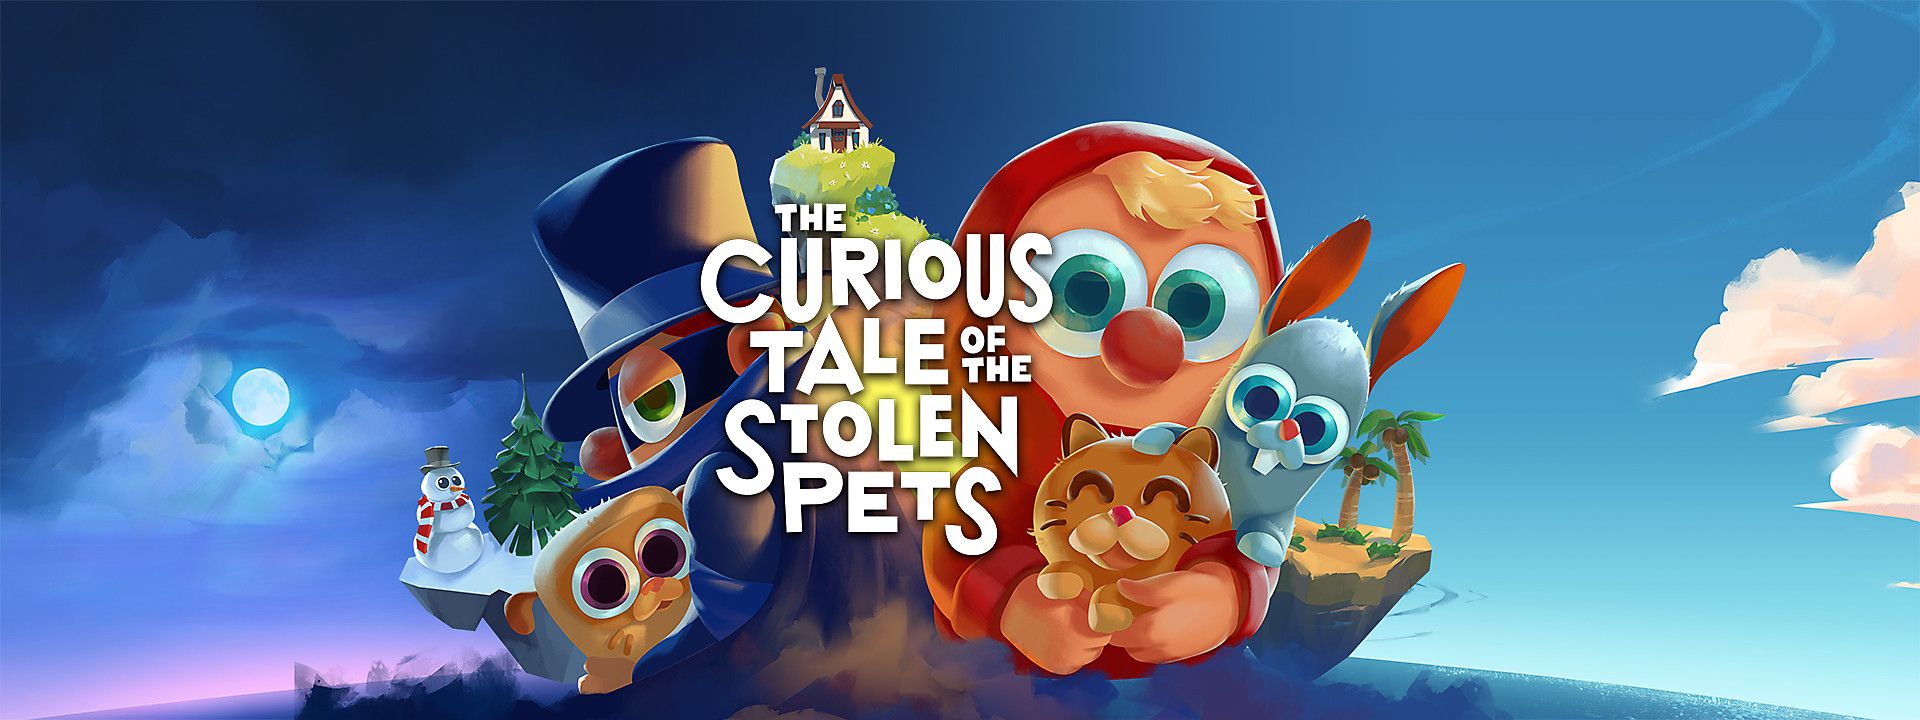 The curious tale of the stolen pets vr title